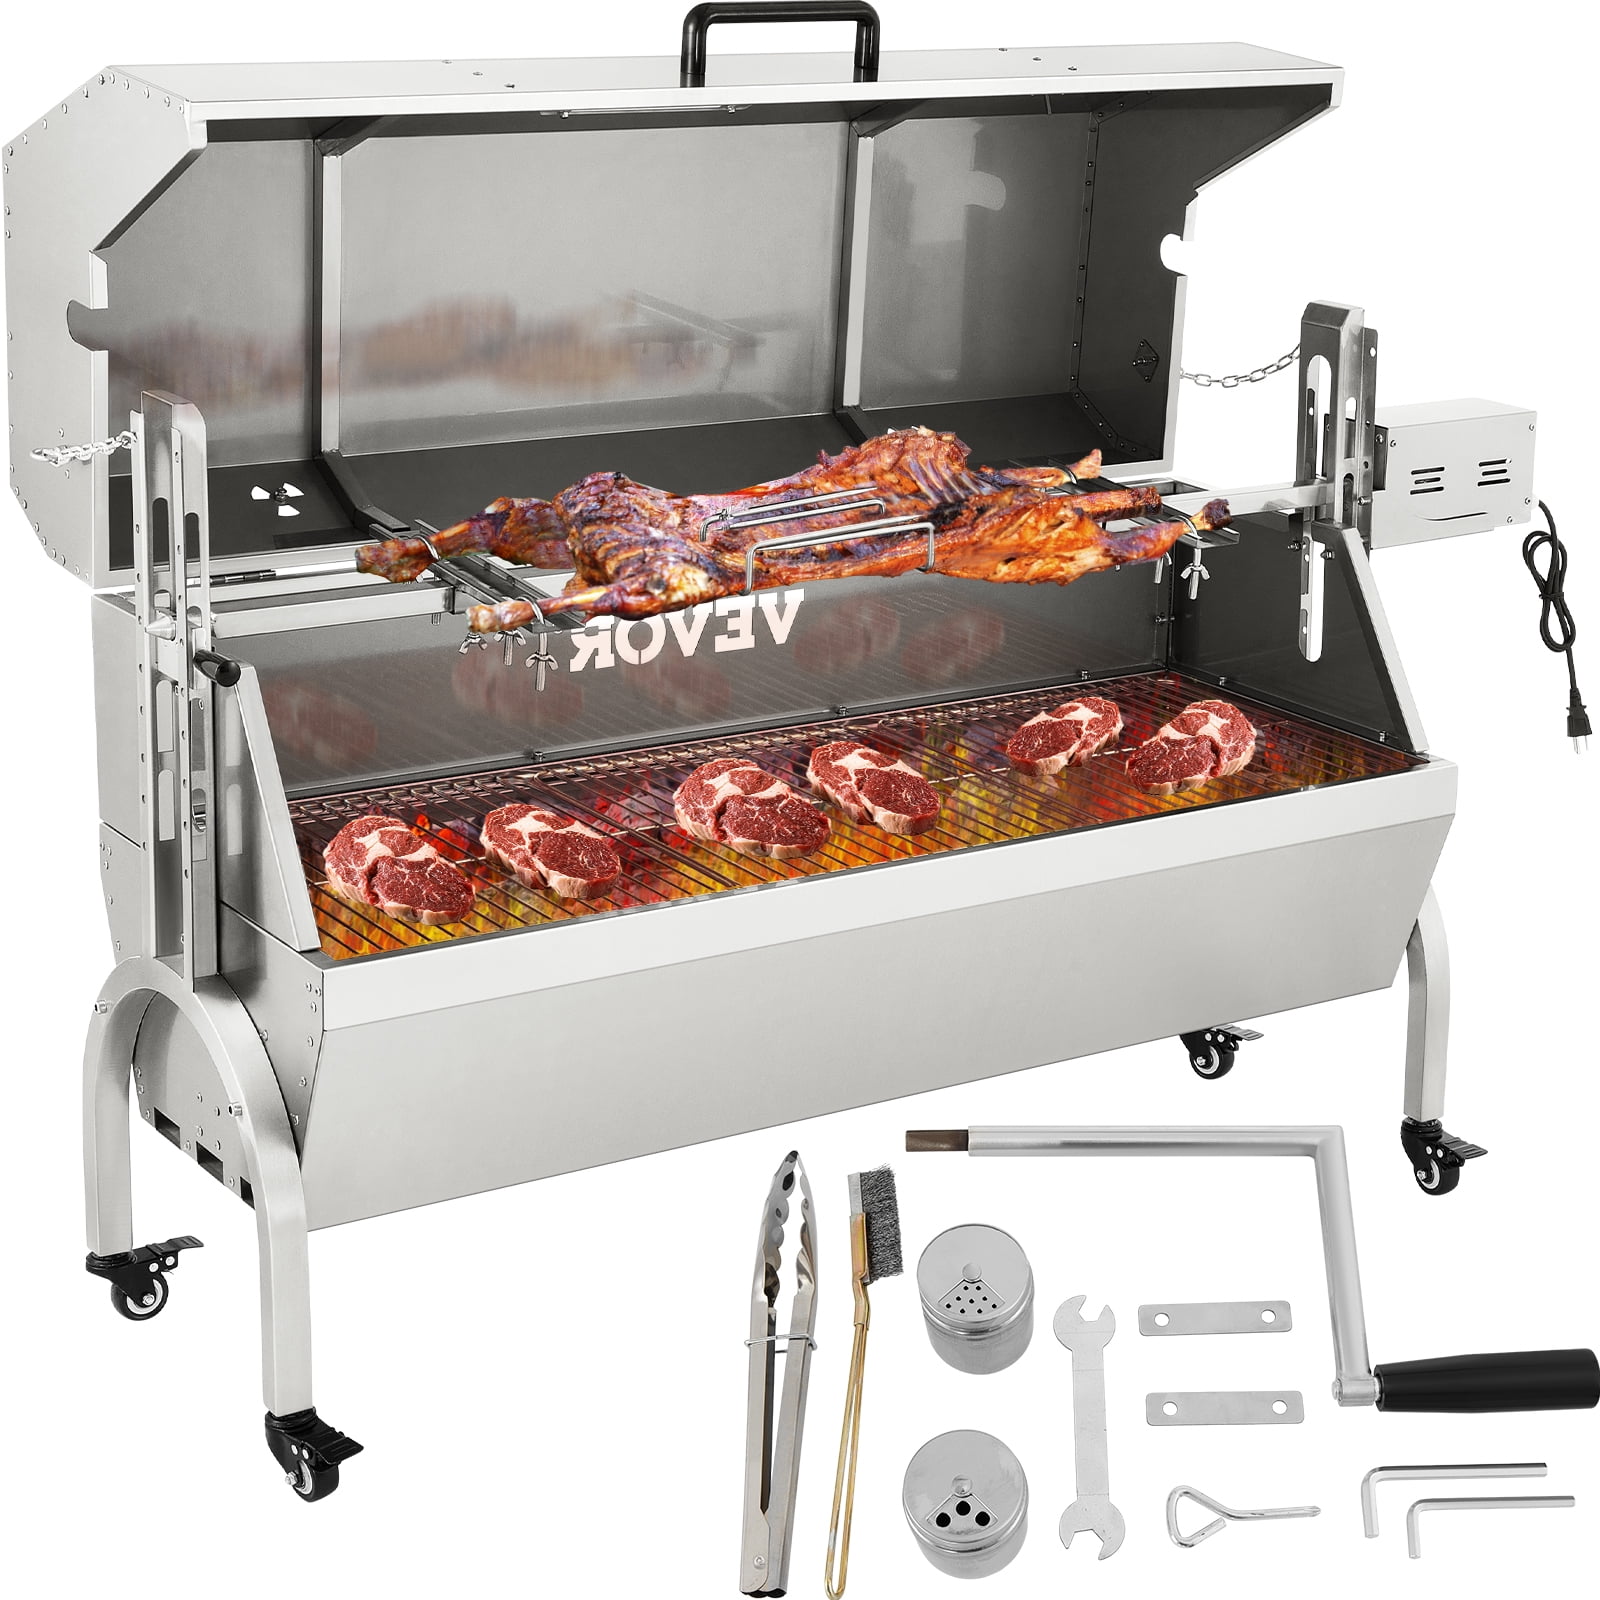 Stainless Steel Flip The Grill Home Roasting Grill Universal Duty Rotisserie Kit